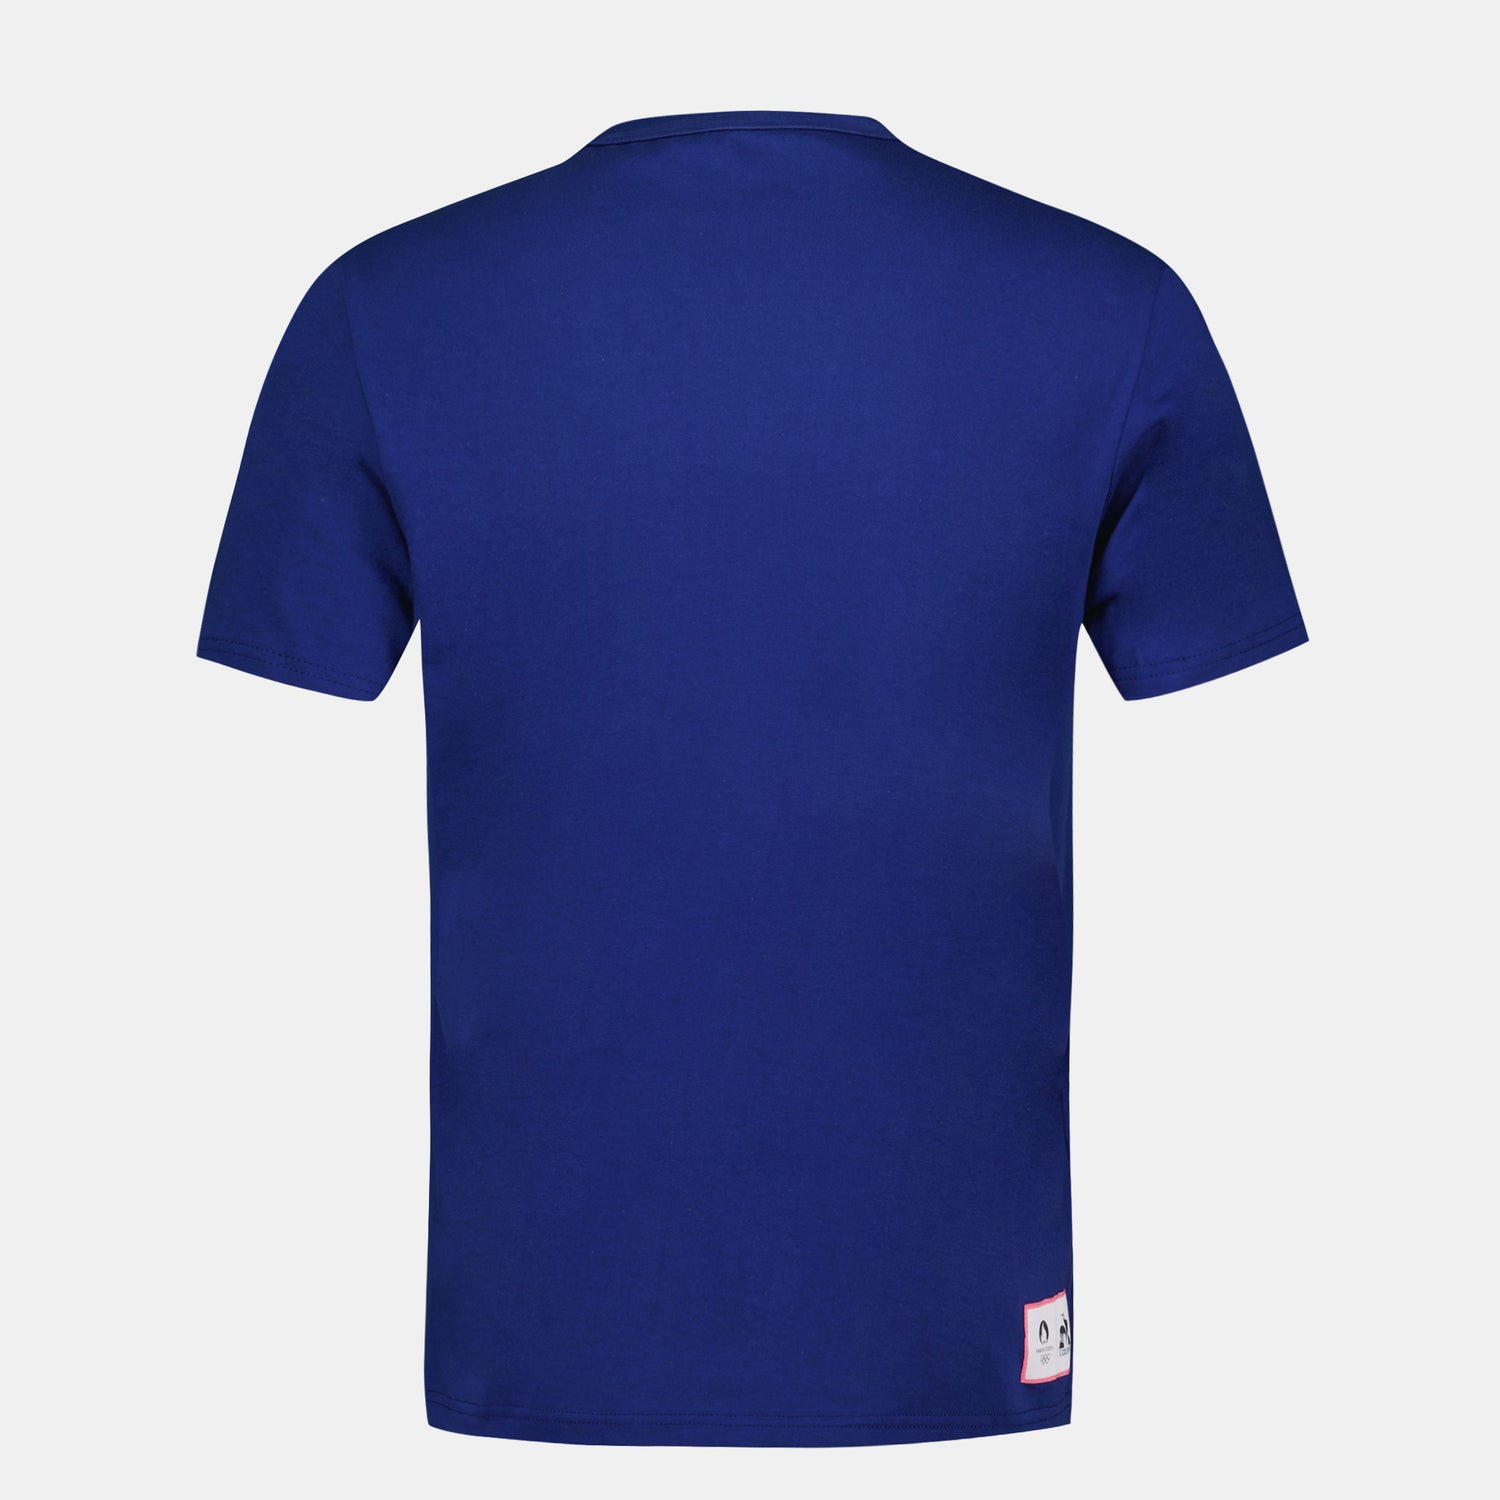 2410270-GRAPHIC P24 Tee SS N°4 M blue depths | T-shirt Homme